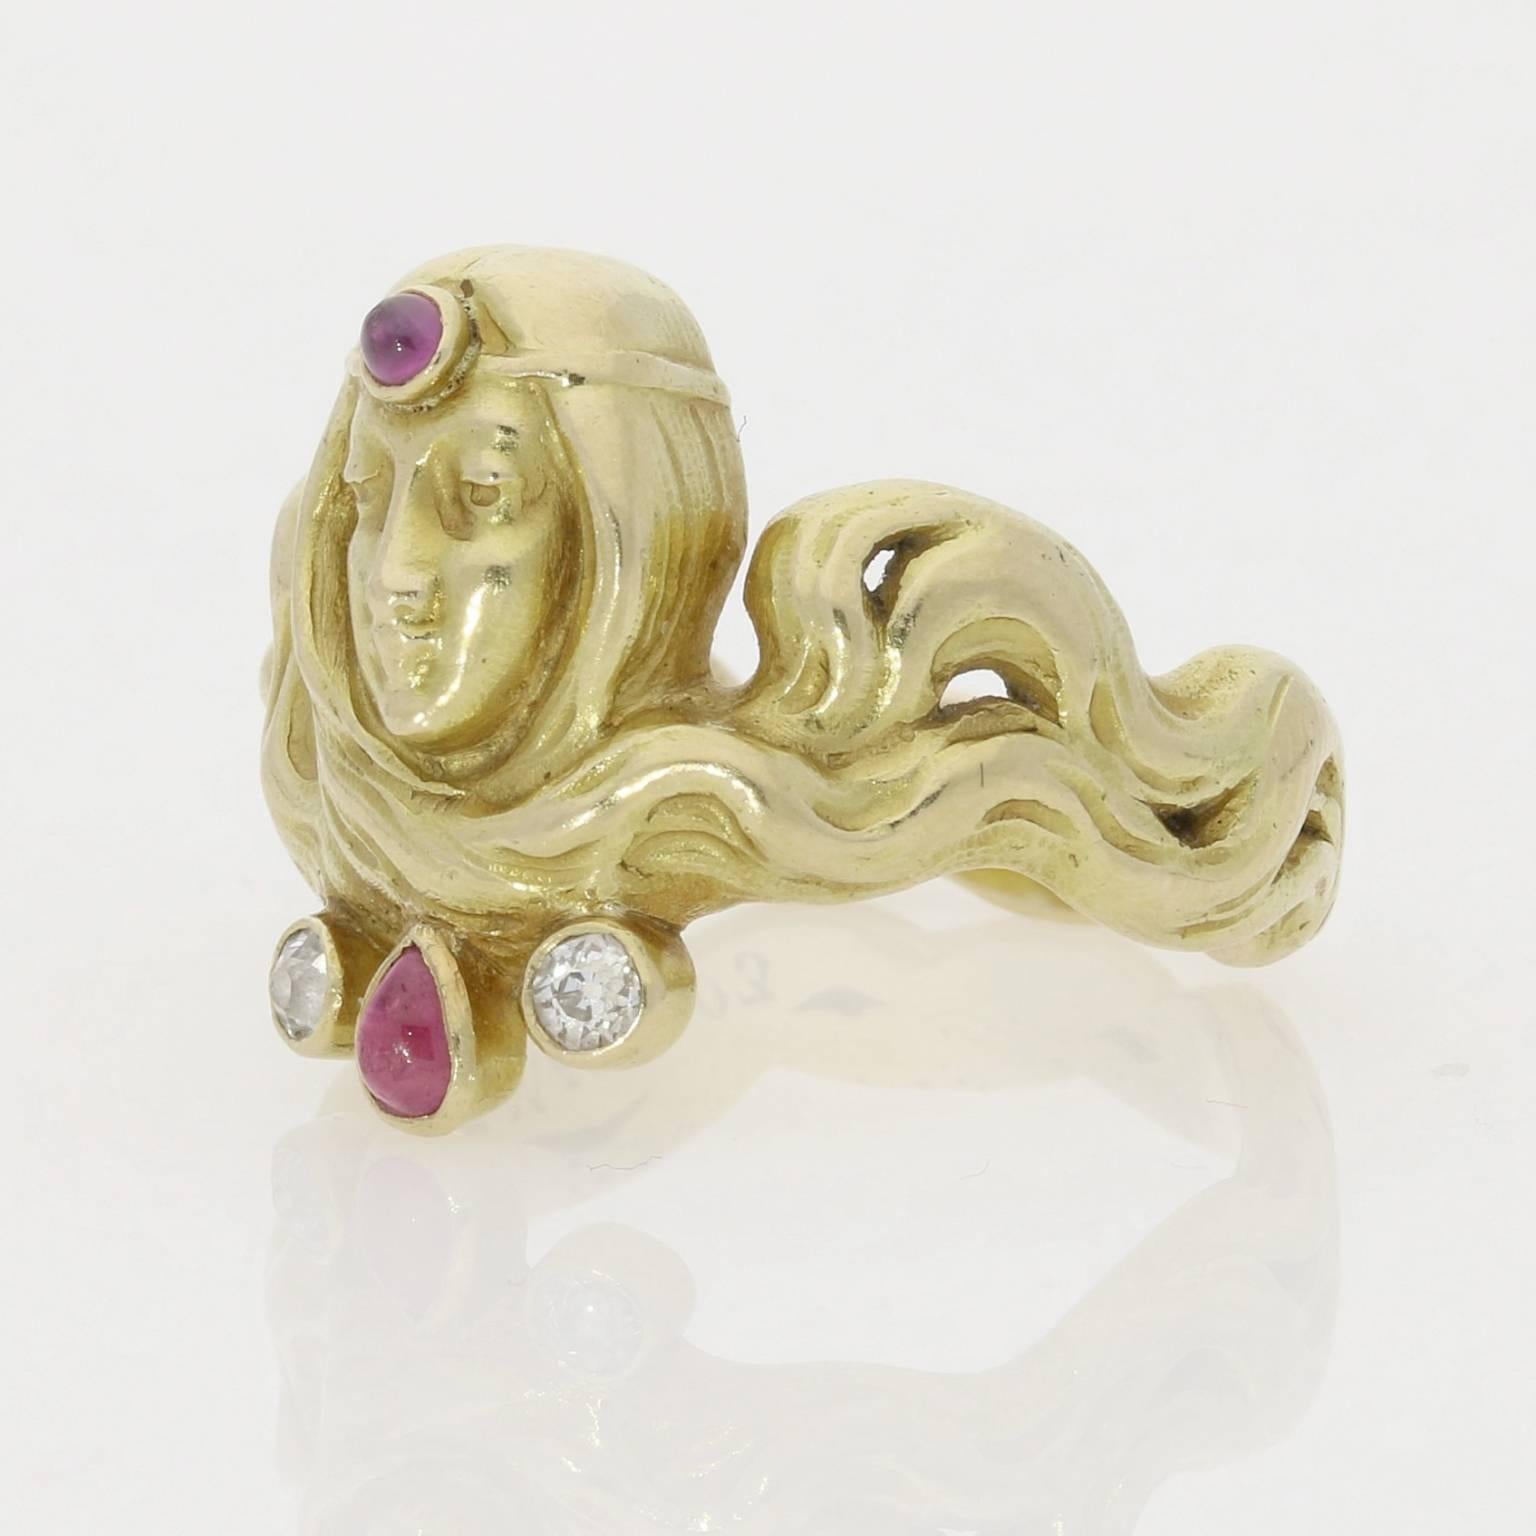 The heavy yellow gold ring modelled as a female head with luxurious flowing hair, highlighted with pink gold, entwined around the finger to form the band of the ring.  She wears a circlet around her forehead set to the centre with a cabochon ruby